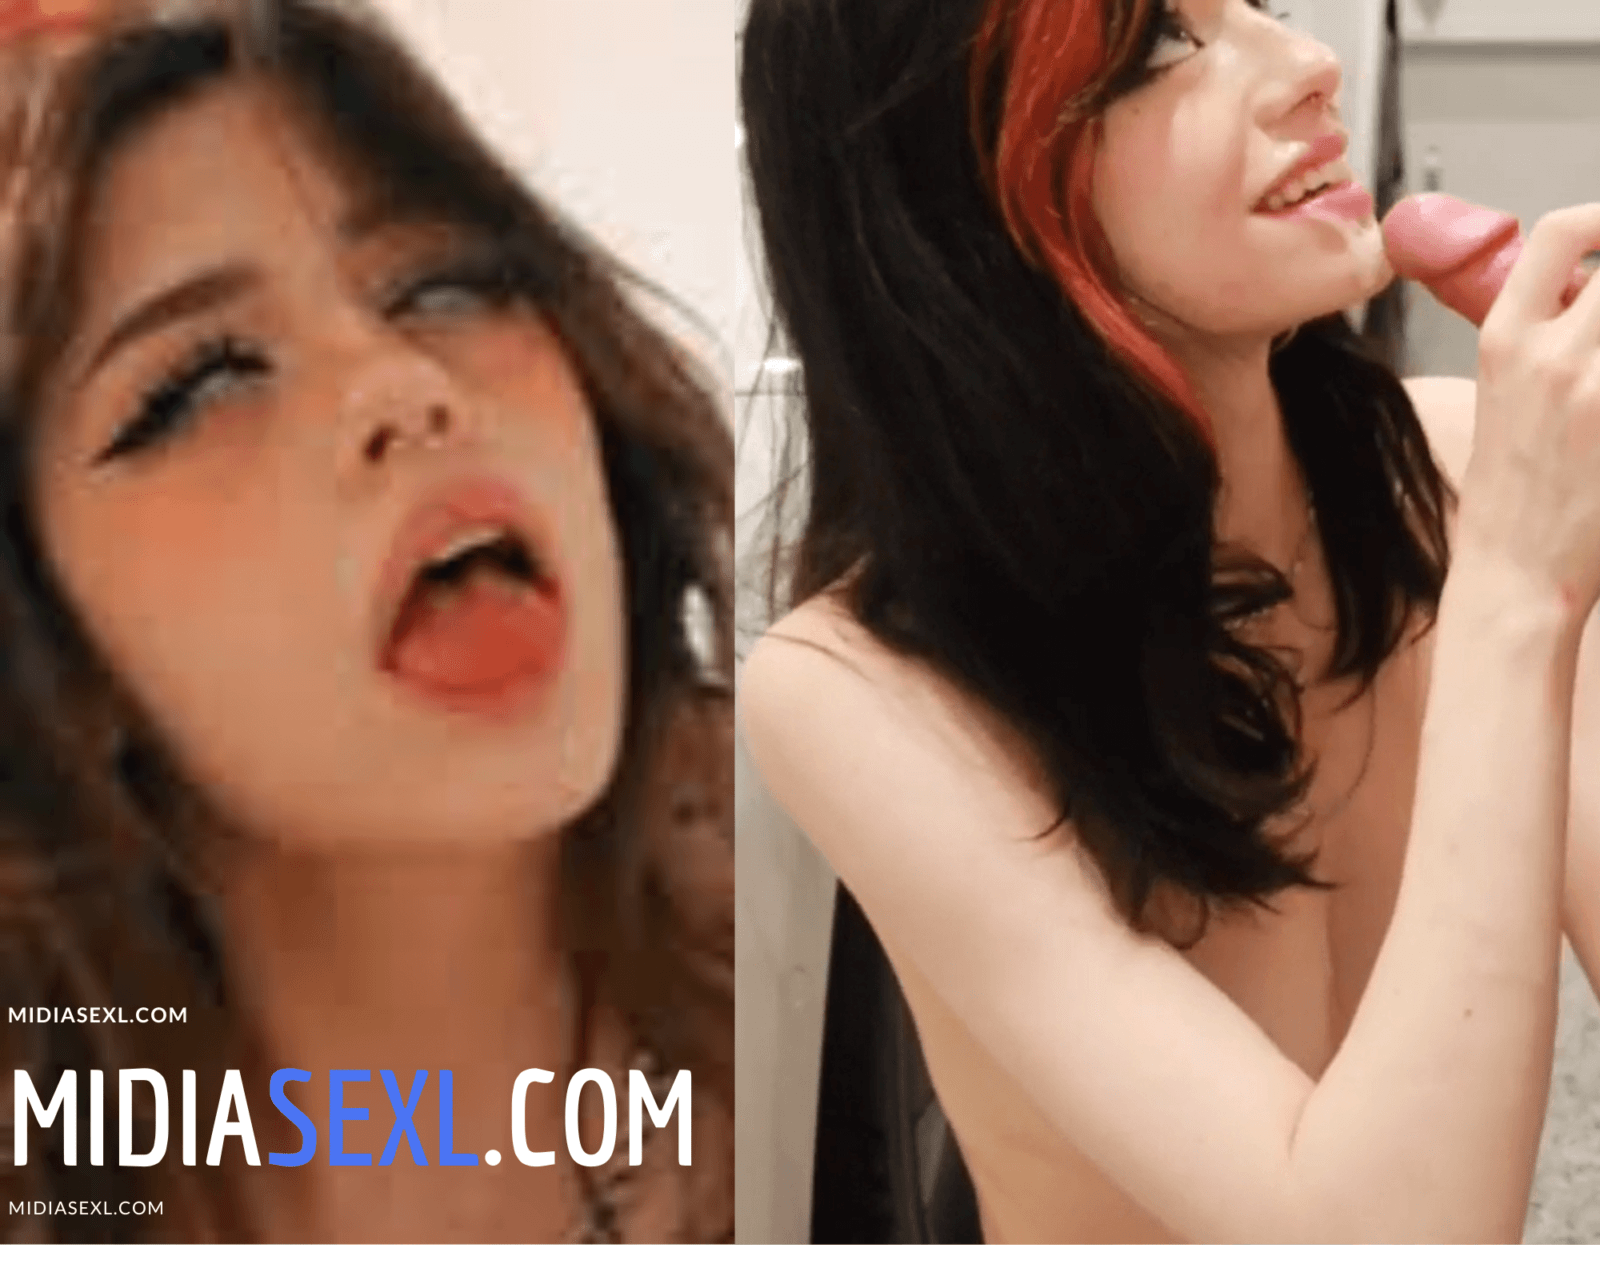 FOURTH SEX TAPE! Hannah owo onlyfans